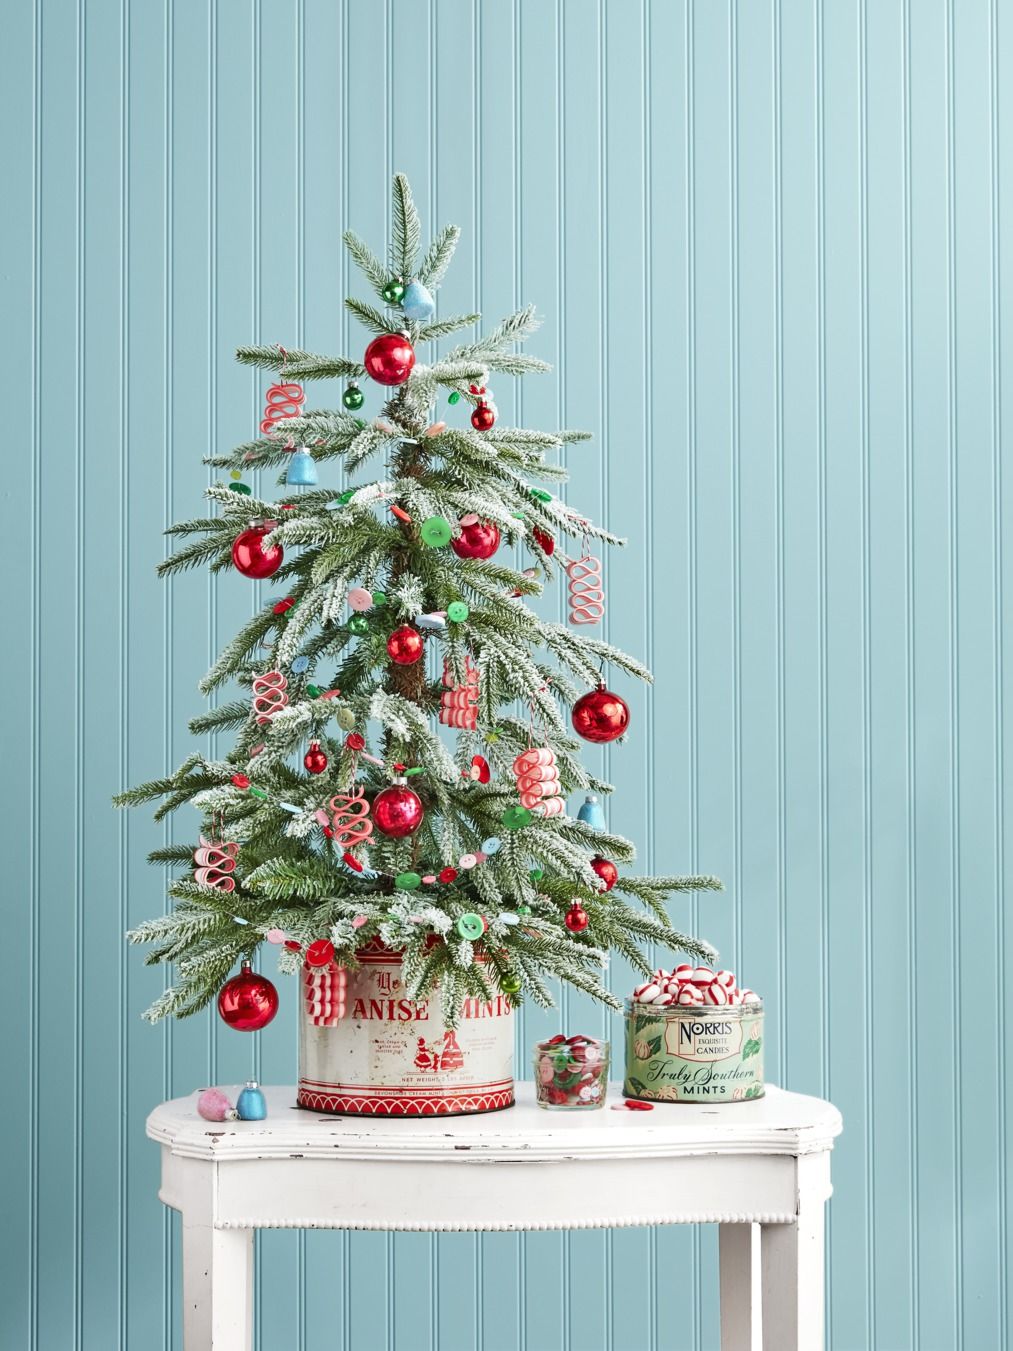 https://hips.hearstapps.com/hmg-prod/images/rustic-christmas-trees-candy-vintage-tin-1574276385.jpg